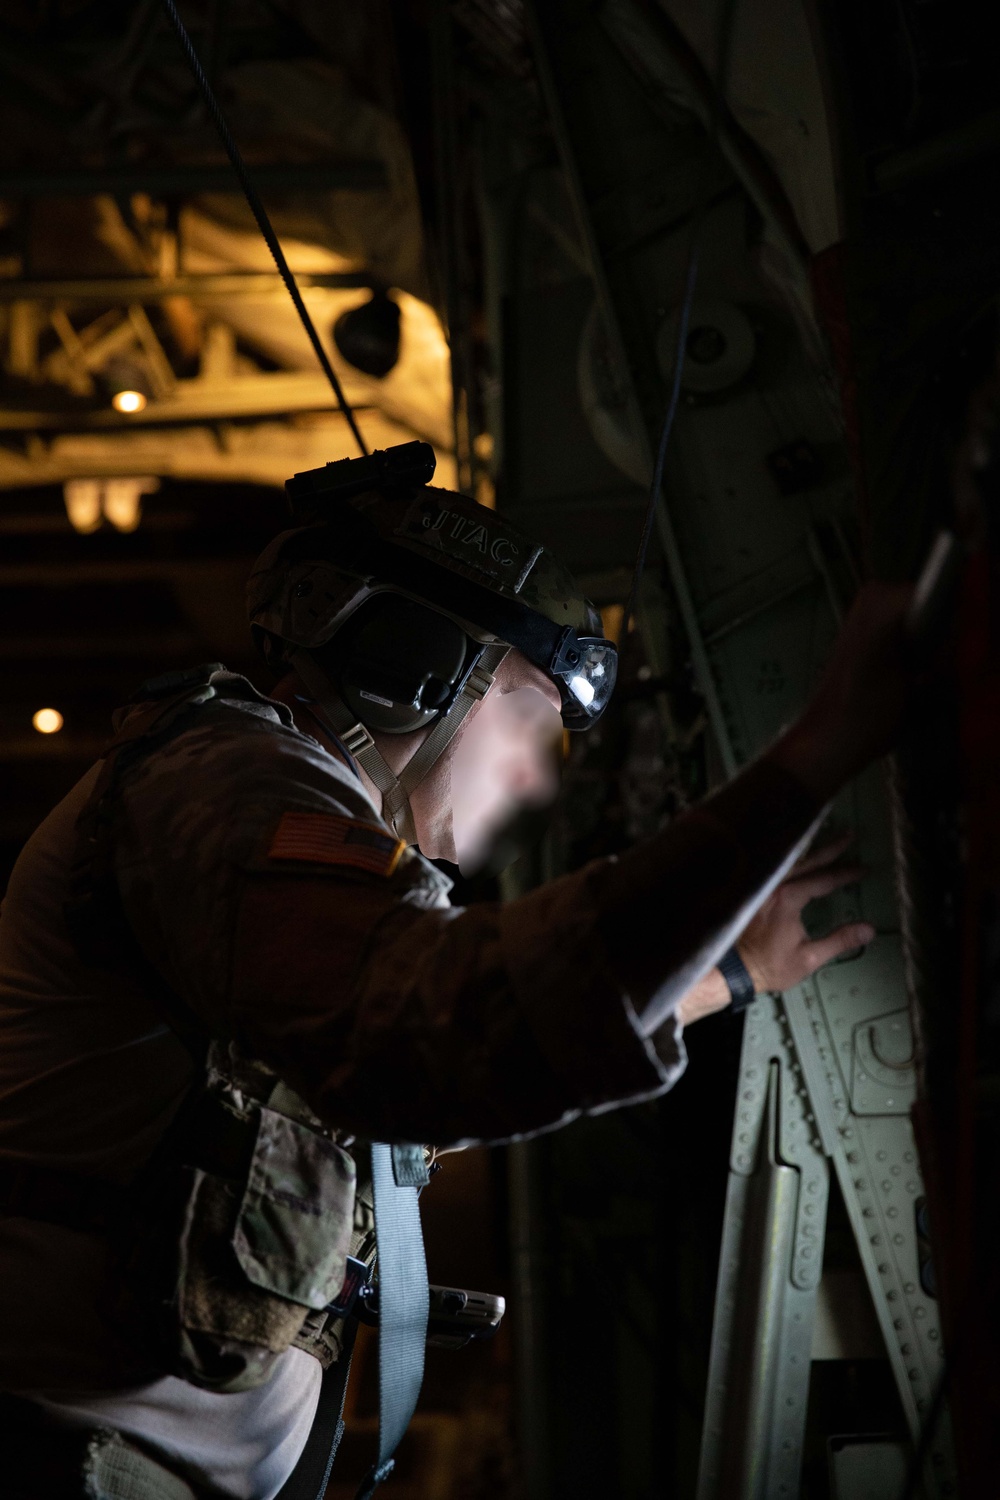 Wait for drop: VMGR-152 conducts joint air drop training with 320th Special Tactics Squadron